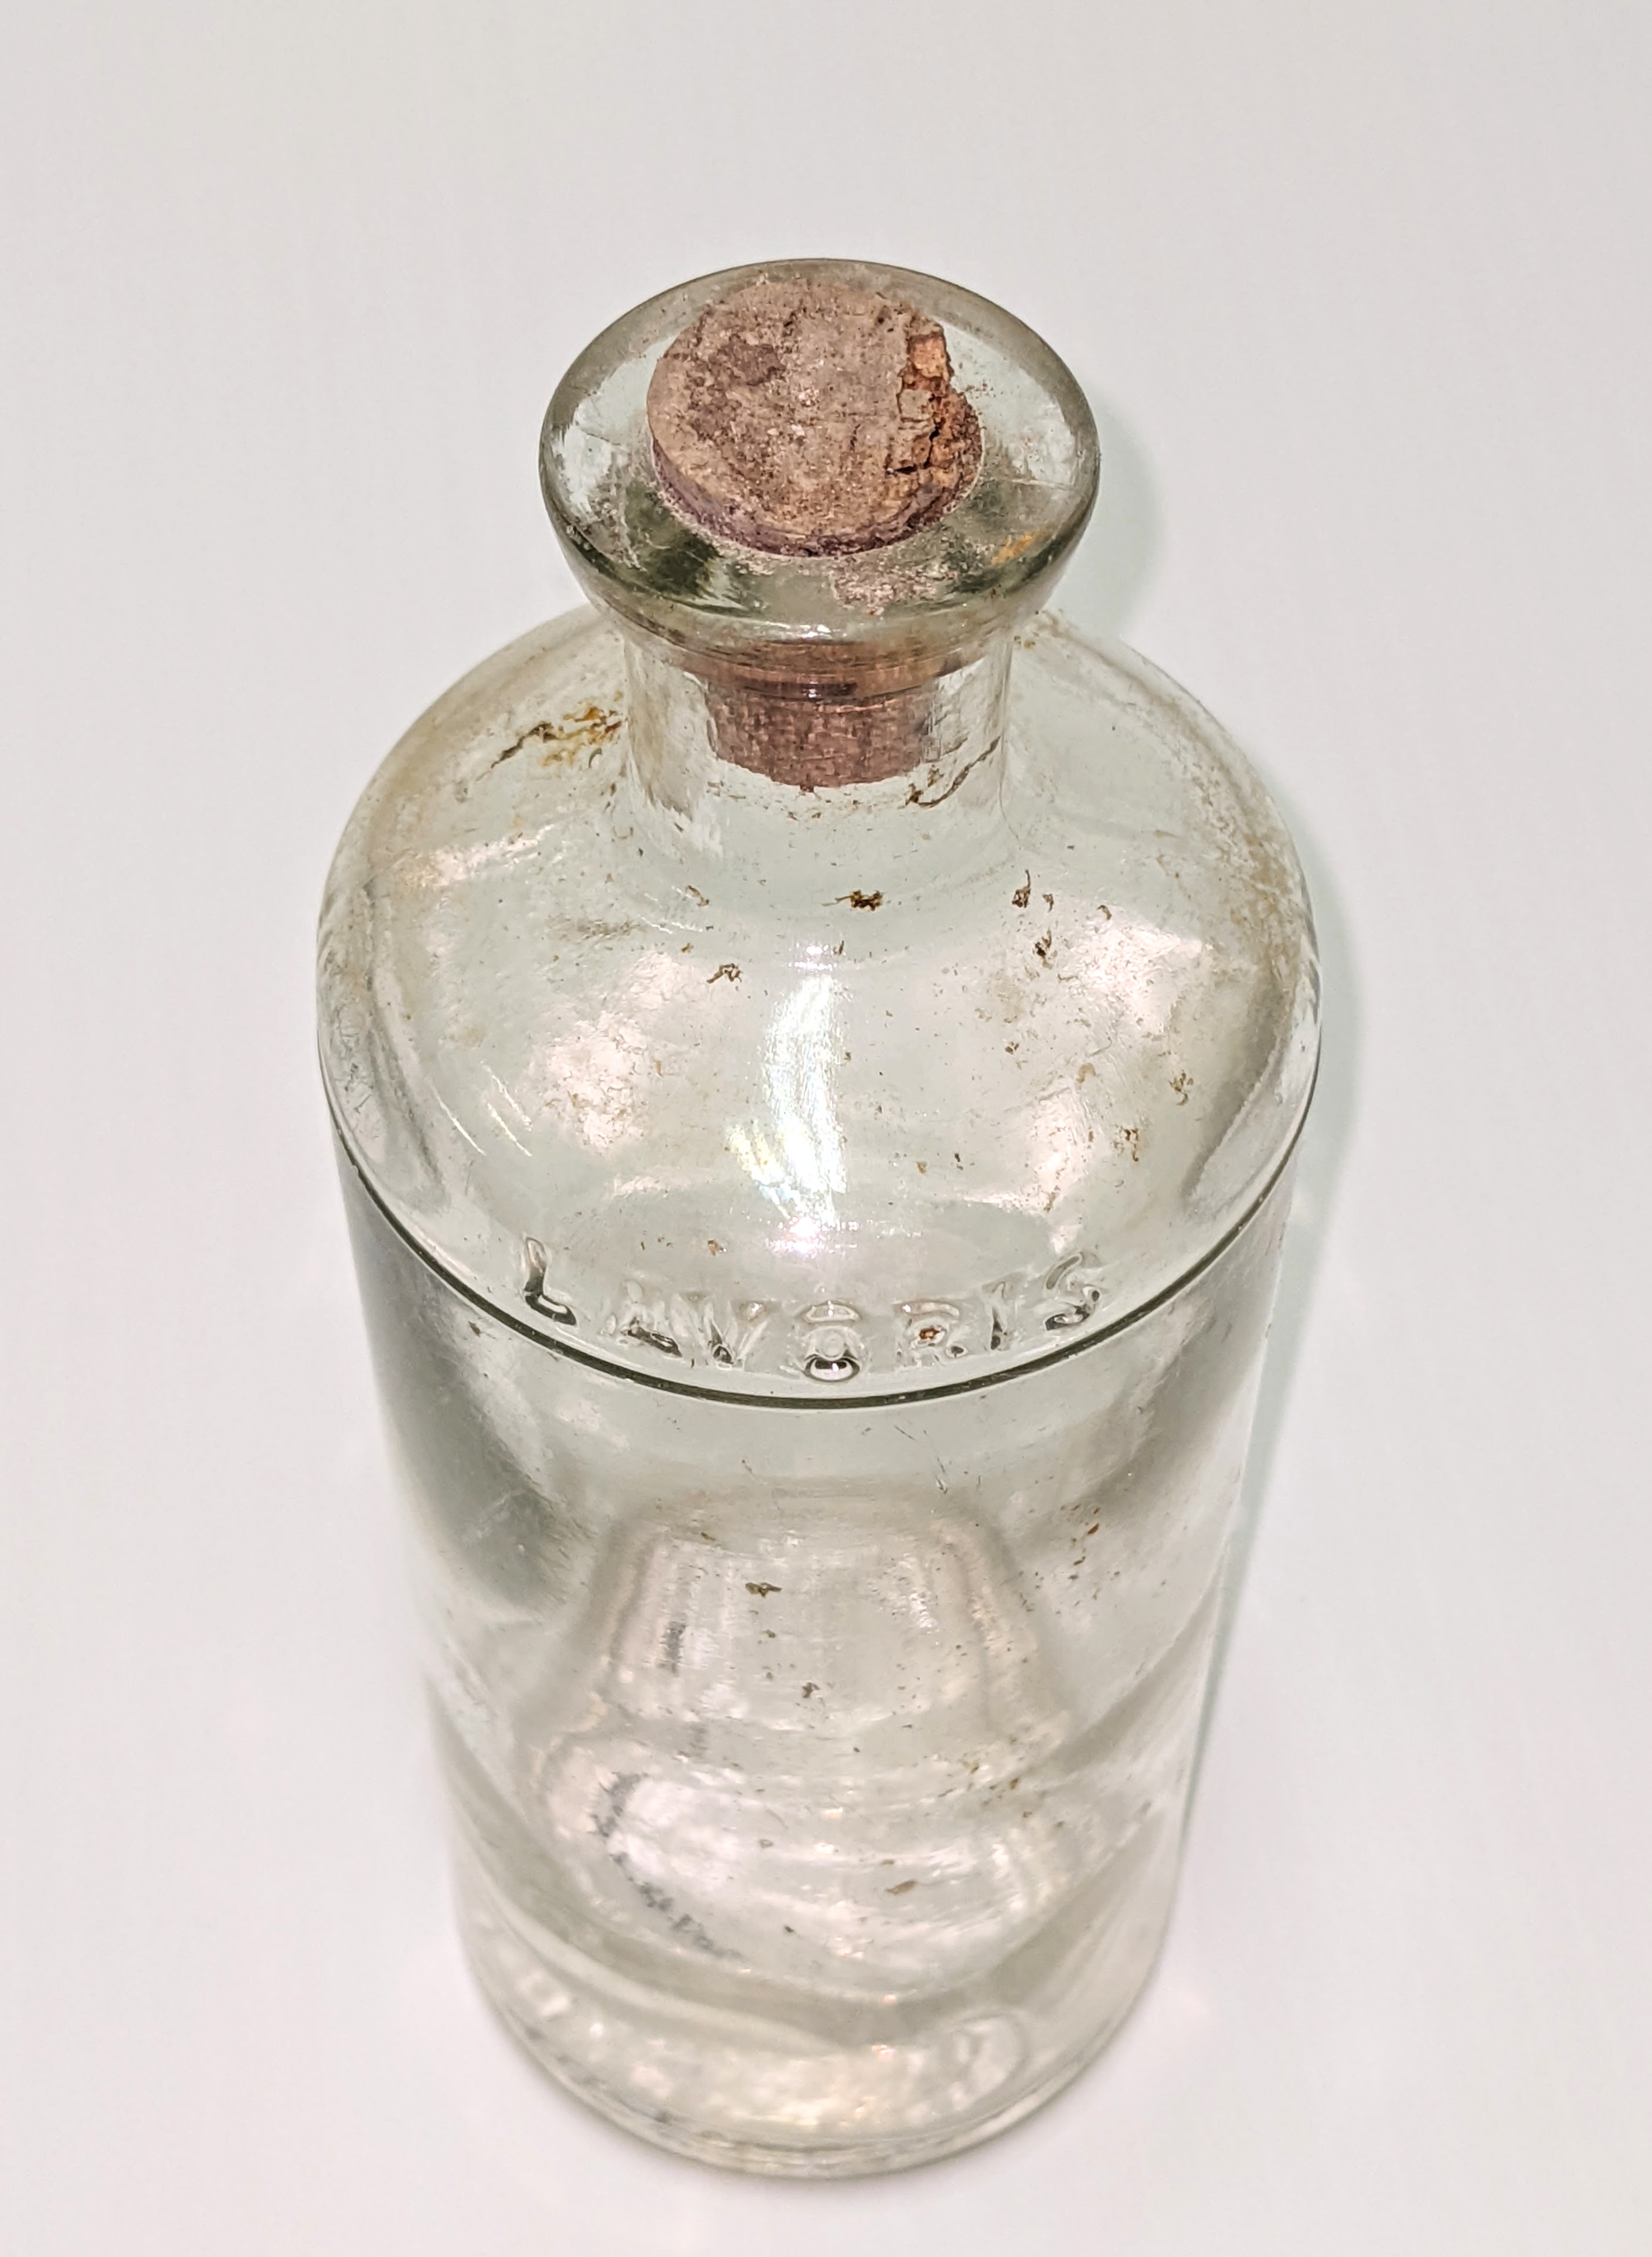 This bottle is from the "Lavoris Chemical Company" as indicated by the glass imprint on the front shoulder of the bottle. Lavoris was a popular mouth wash started in Minneapolis USA and spread widely across North America. This bottle is missing it's label but the bottom indicated that it was made in Toronto Canada and so could be from the 1920's. The mouth wash was mint flavored and contained 3% alcohol.
07/02/2022
2007.48.02.04 / Friends of the Old Bay House Society